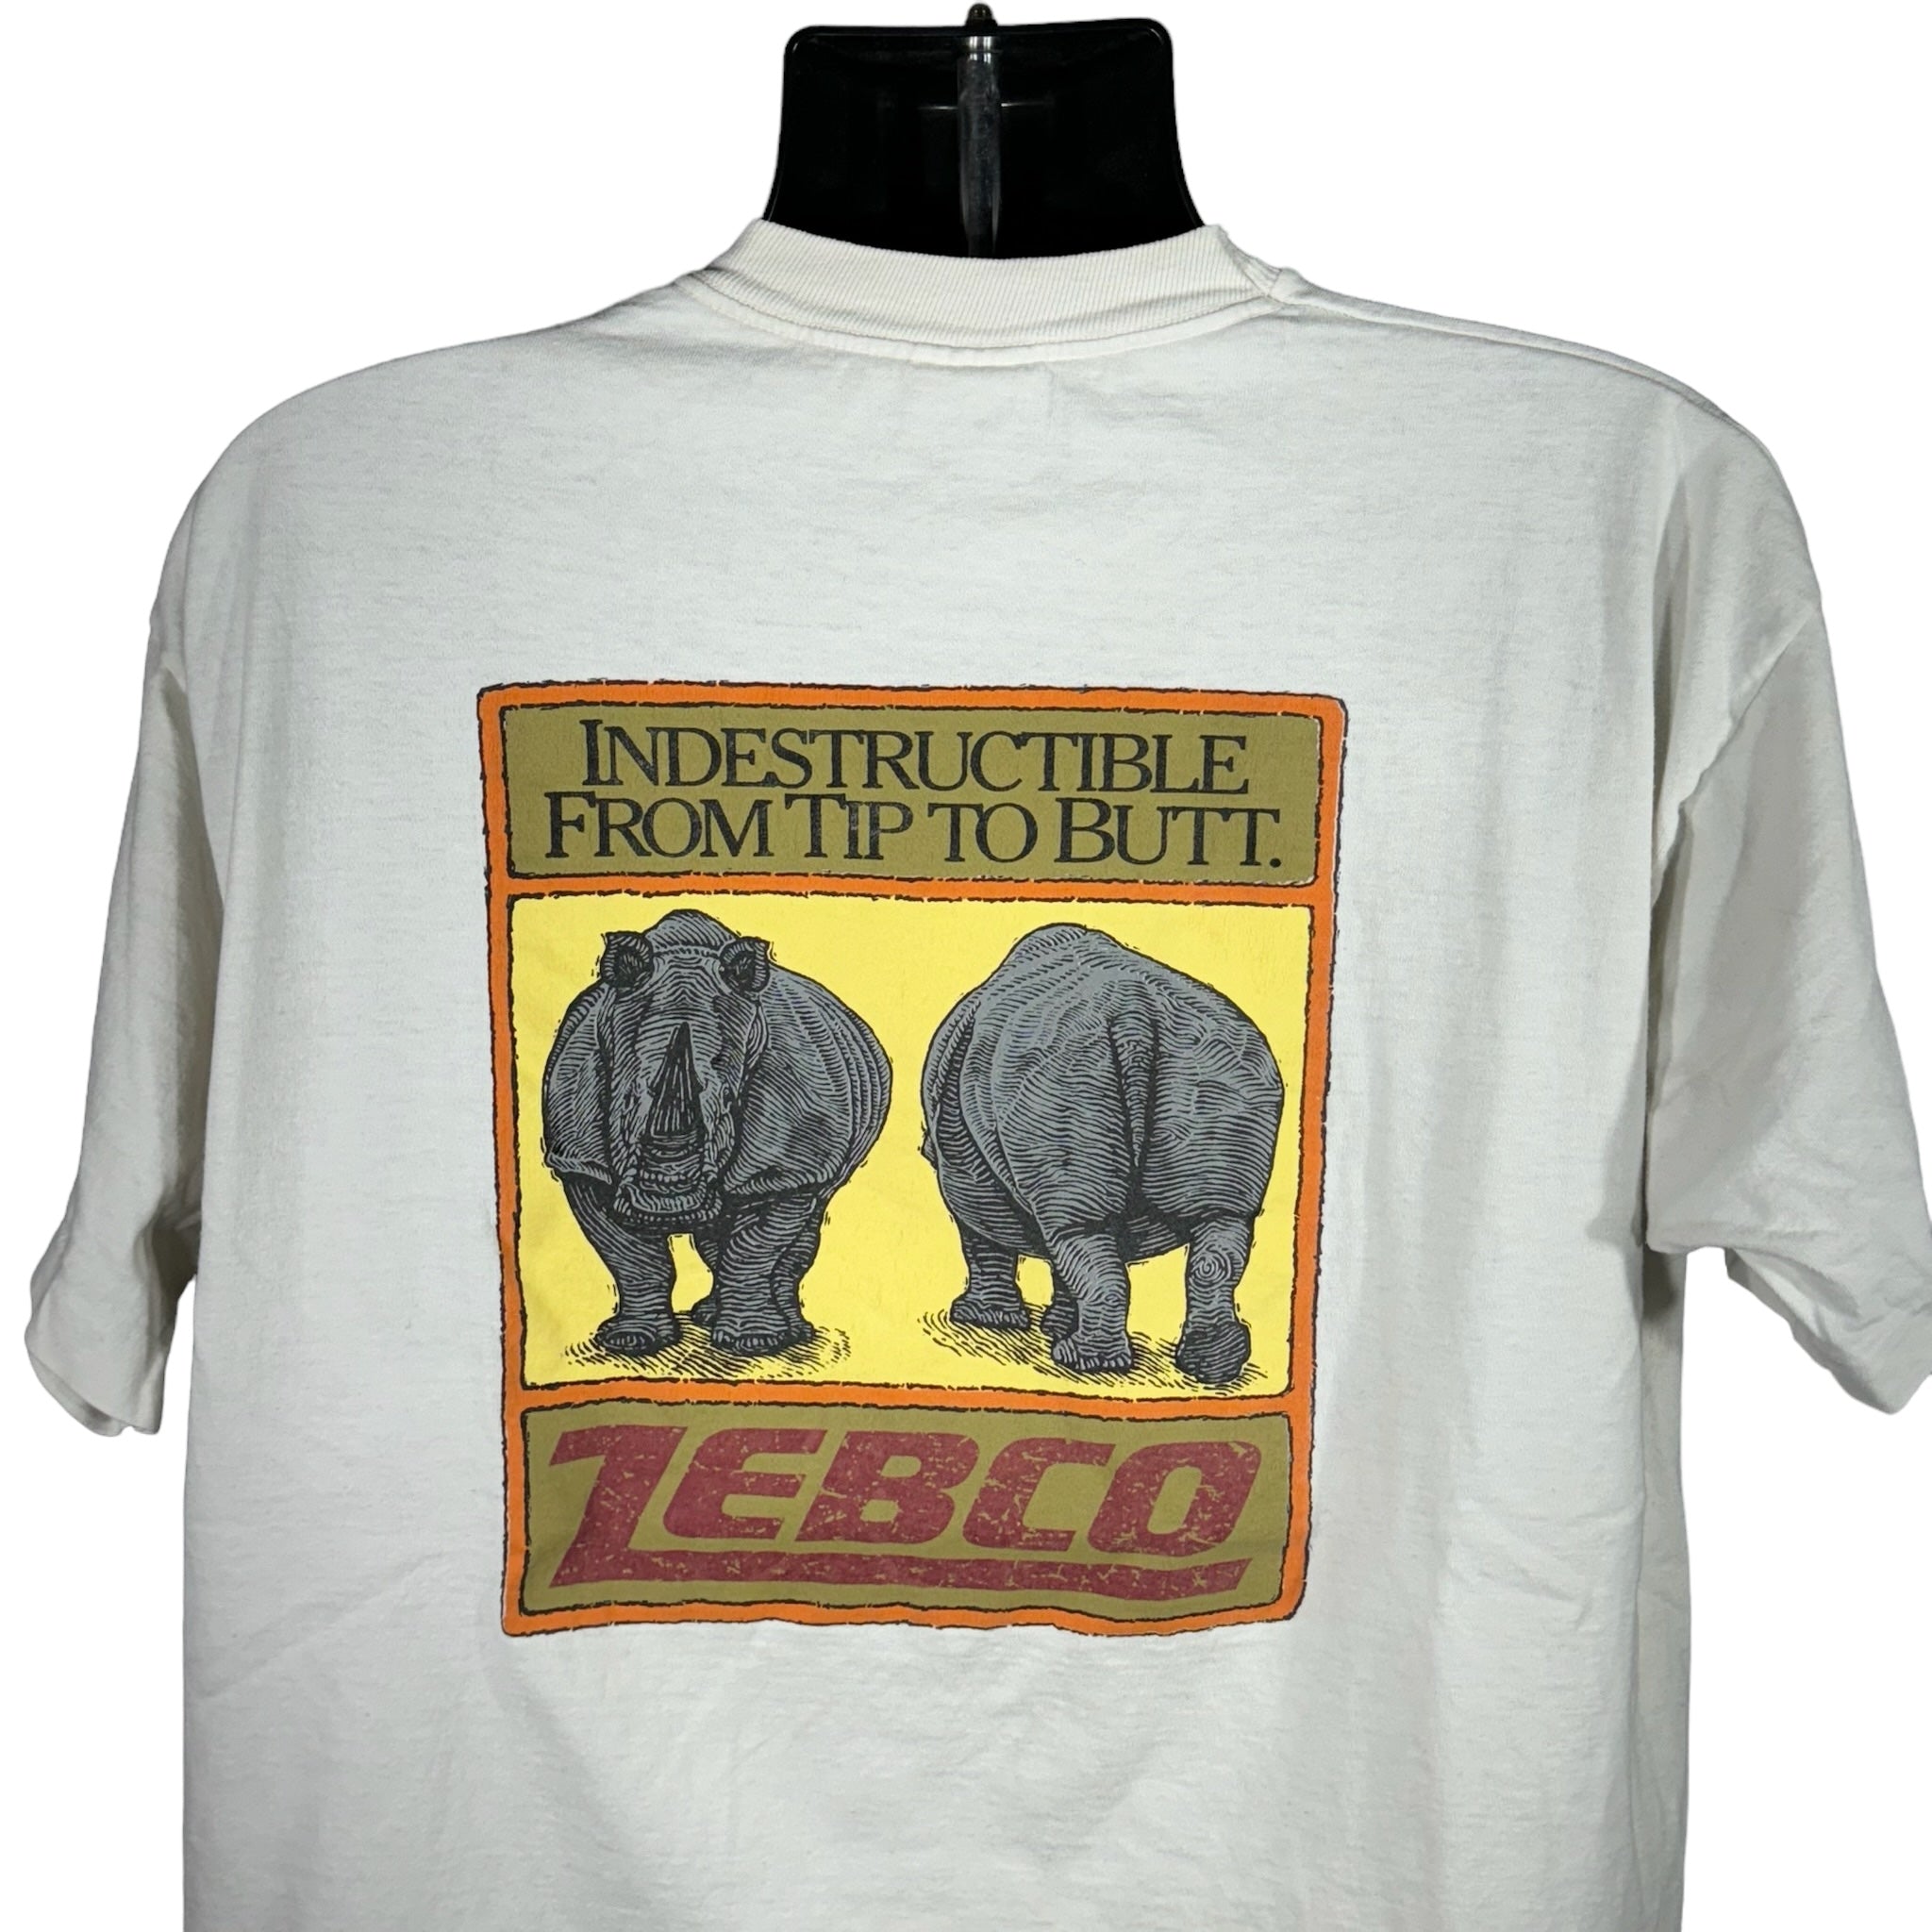 Vintage Zebco "Indestructible From Tip To Butt" Tee Mullet 90s